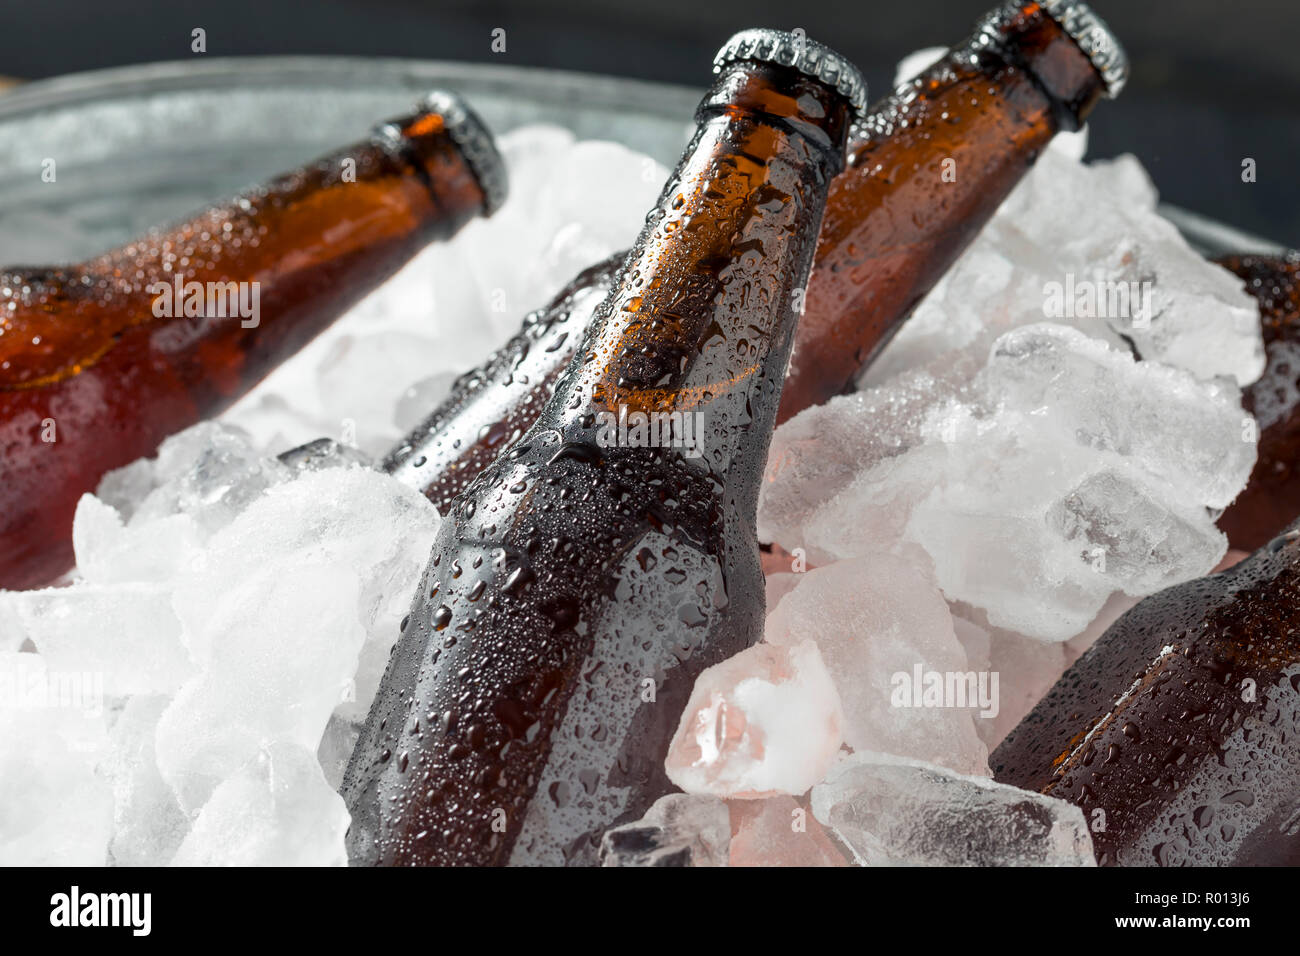 Cold Icy Beer Bottles in a Cooler with Ice Stock Photo